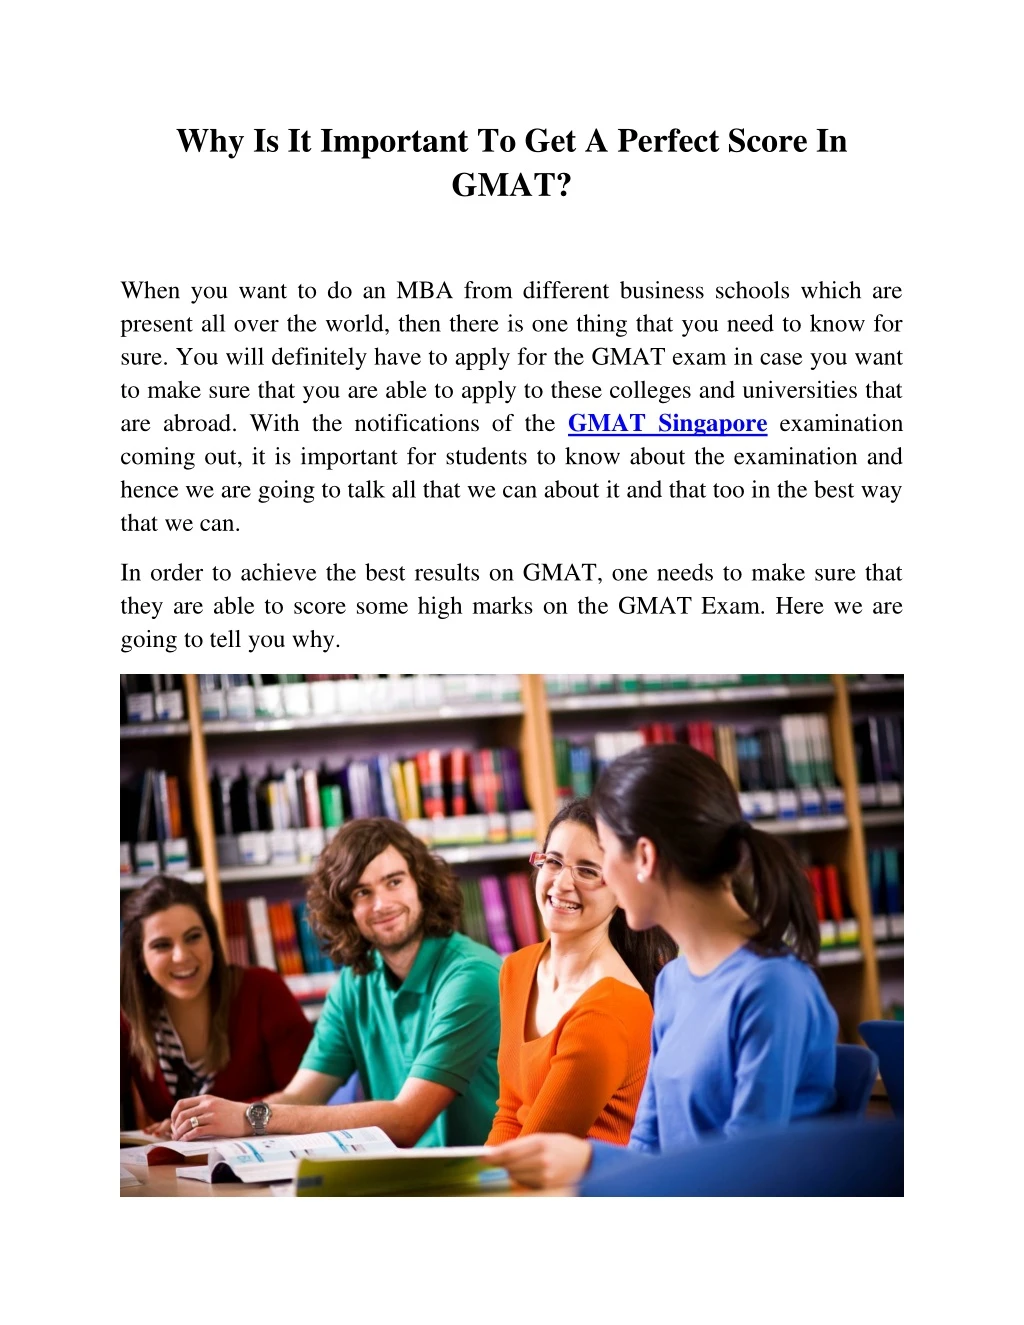 why is it important to get a perfect score in gmat